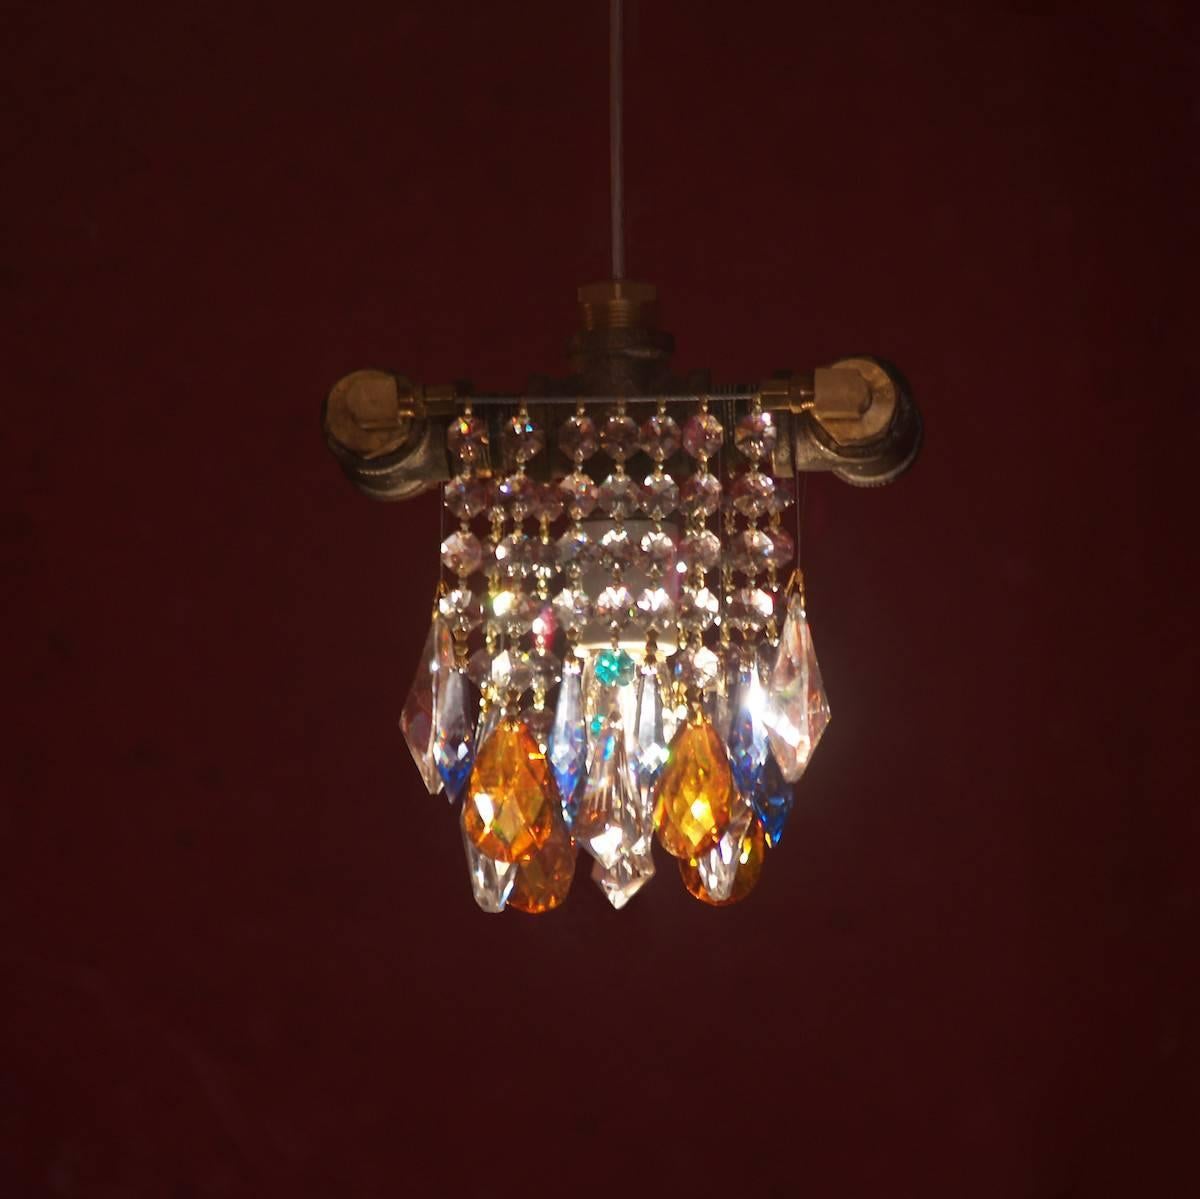 The single-bulb chandelier incorporates all the modern lighting design elements and delicious Industrial chic contrasts of McHale Chandeliers into a single jewel of a chandelier. Perfect for small applications, or anywhere that needs a touch of